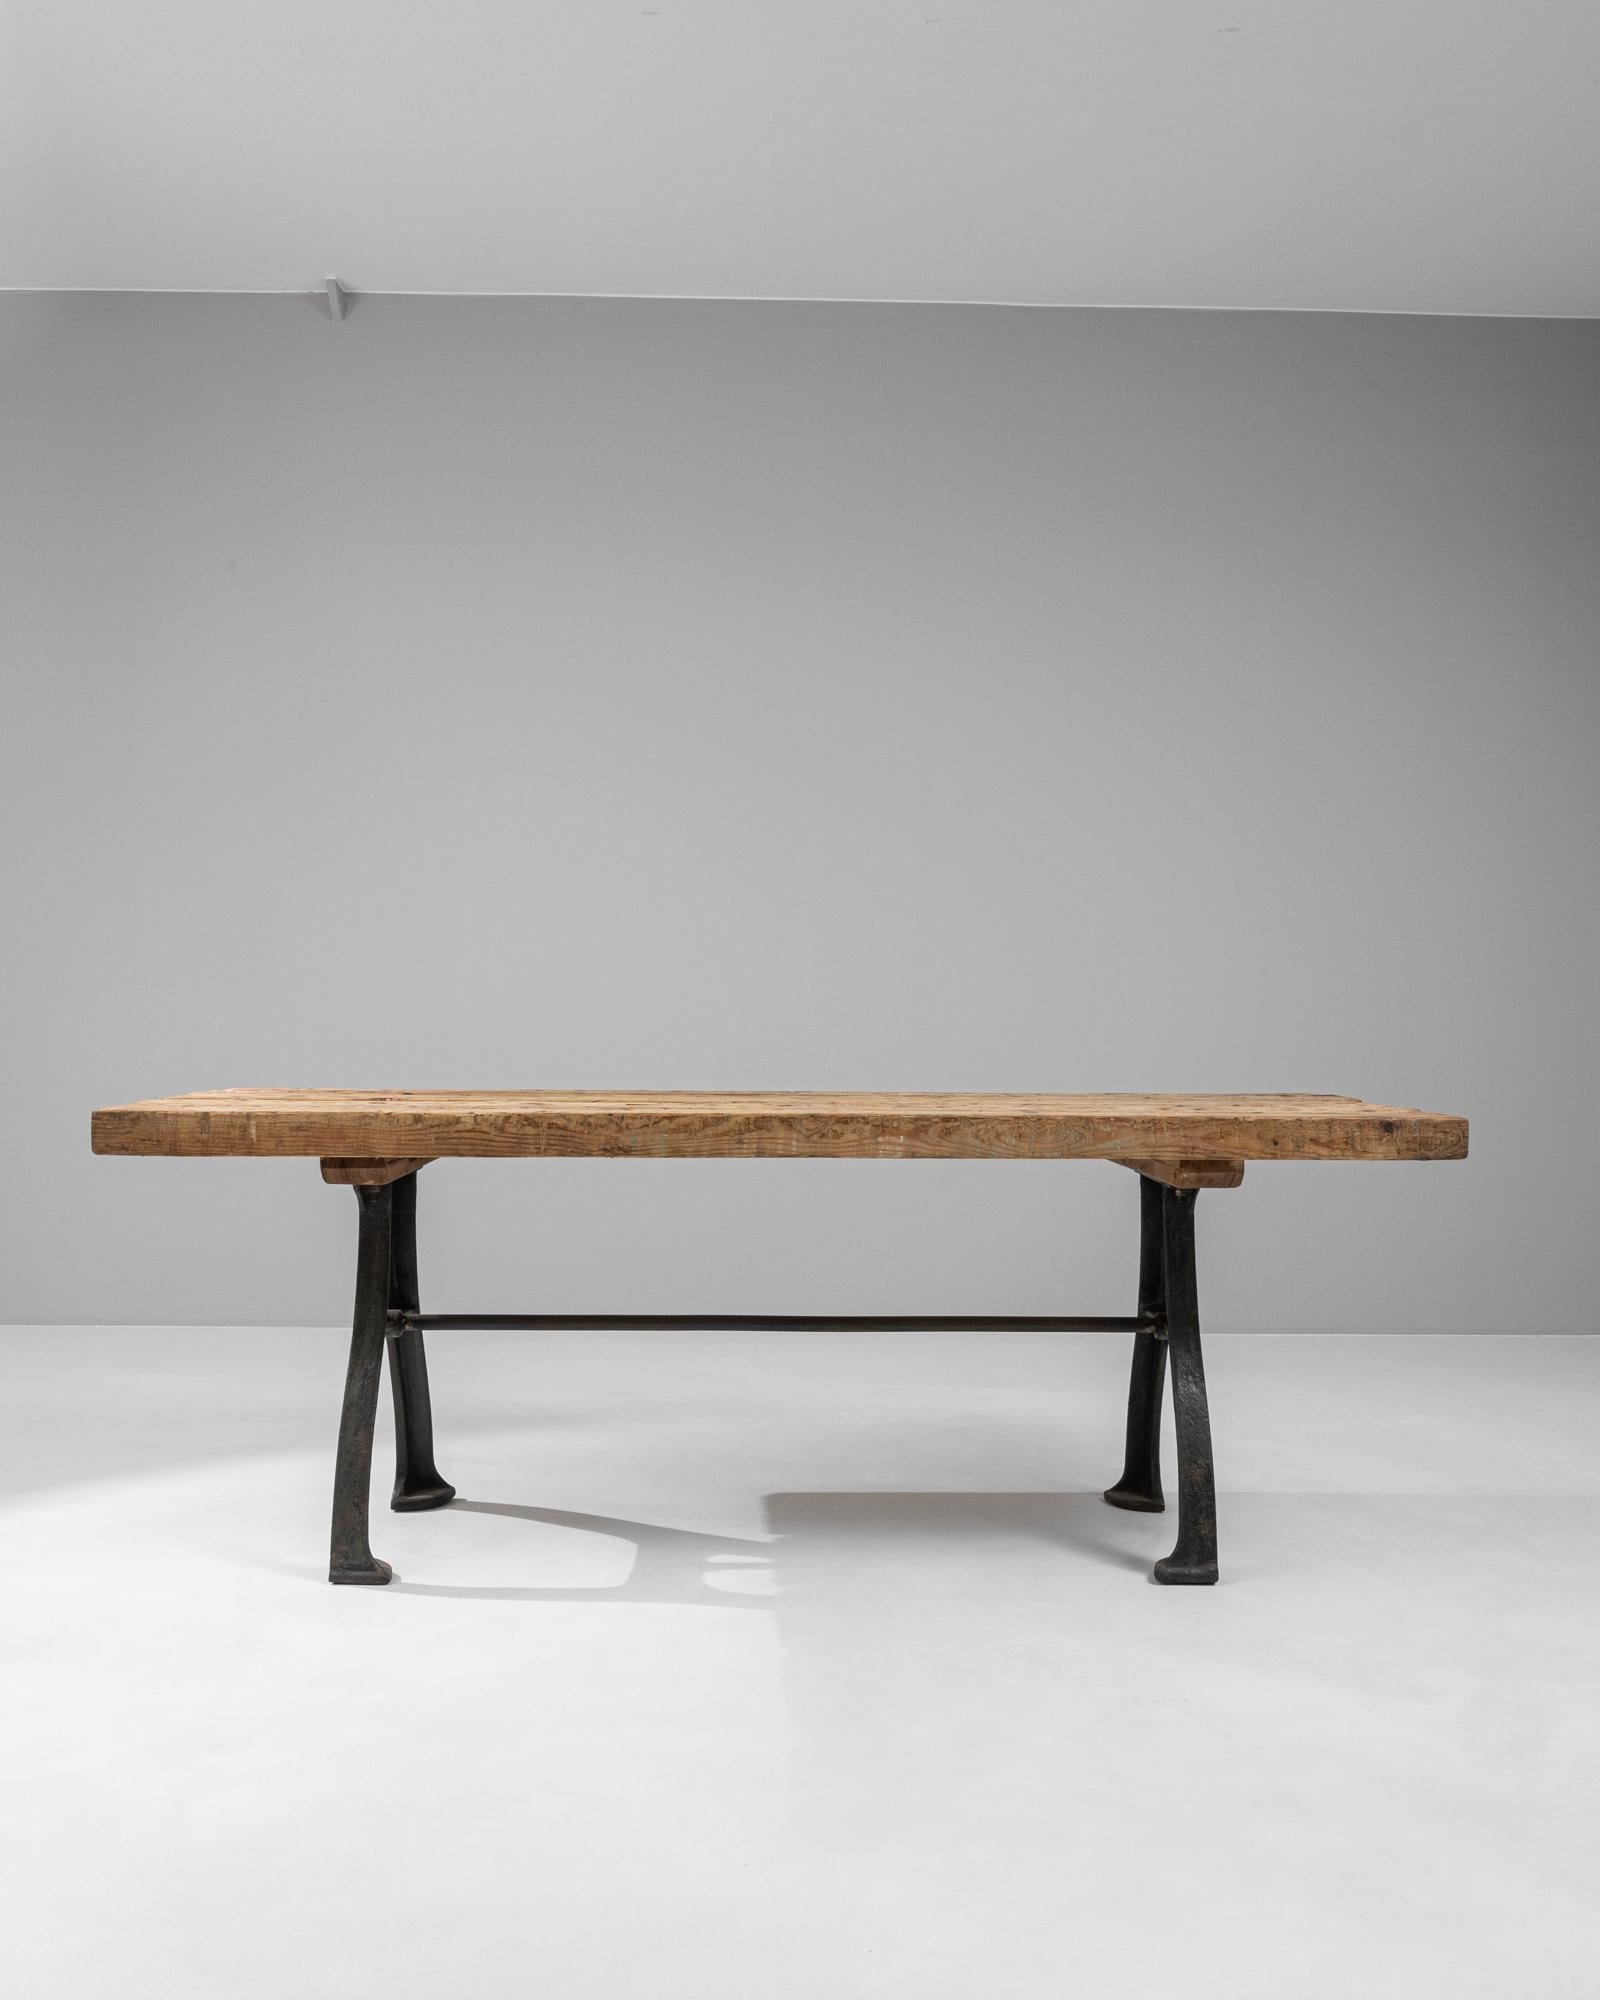 This early 20th-century French industrial table exemplifies the fusion of rugged functionality and aesthetic grace. The table features a solid, thick wooden top, rich with the character of well-worn wood, showing distinctive grain patterns and a